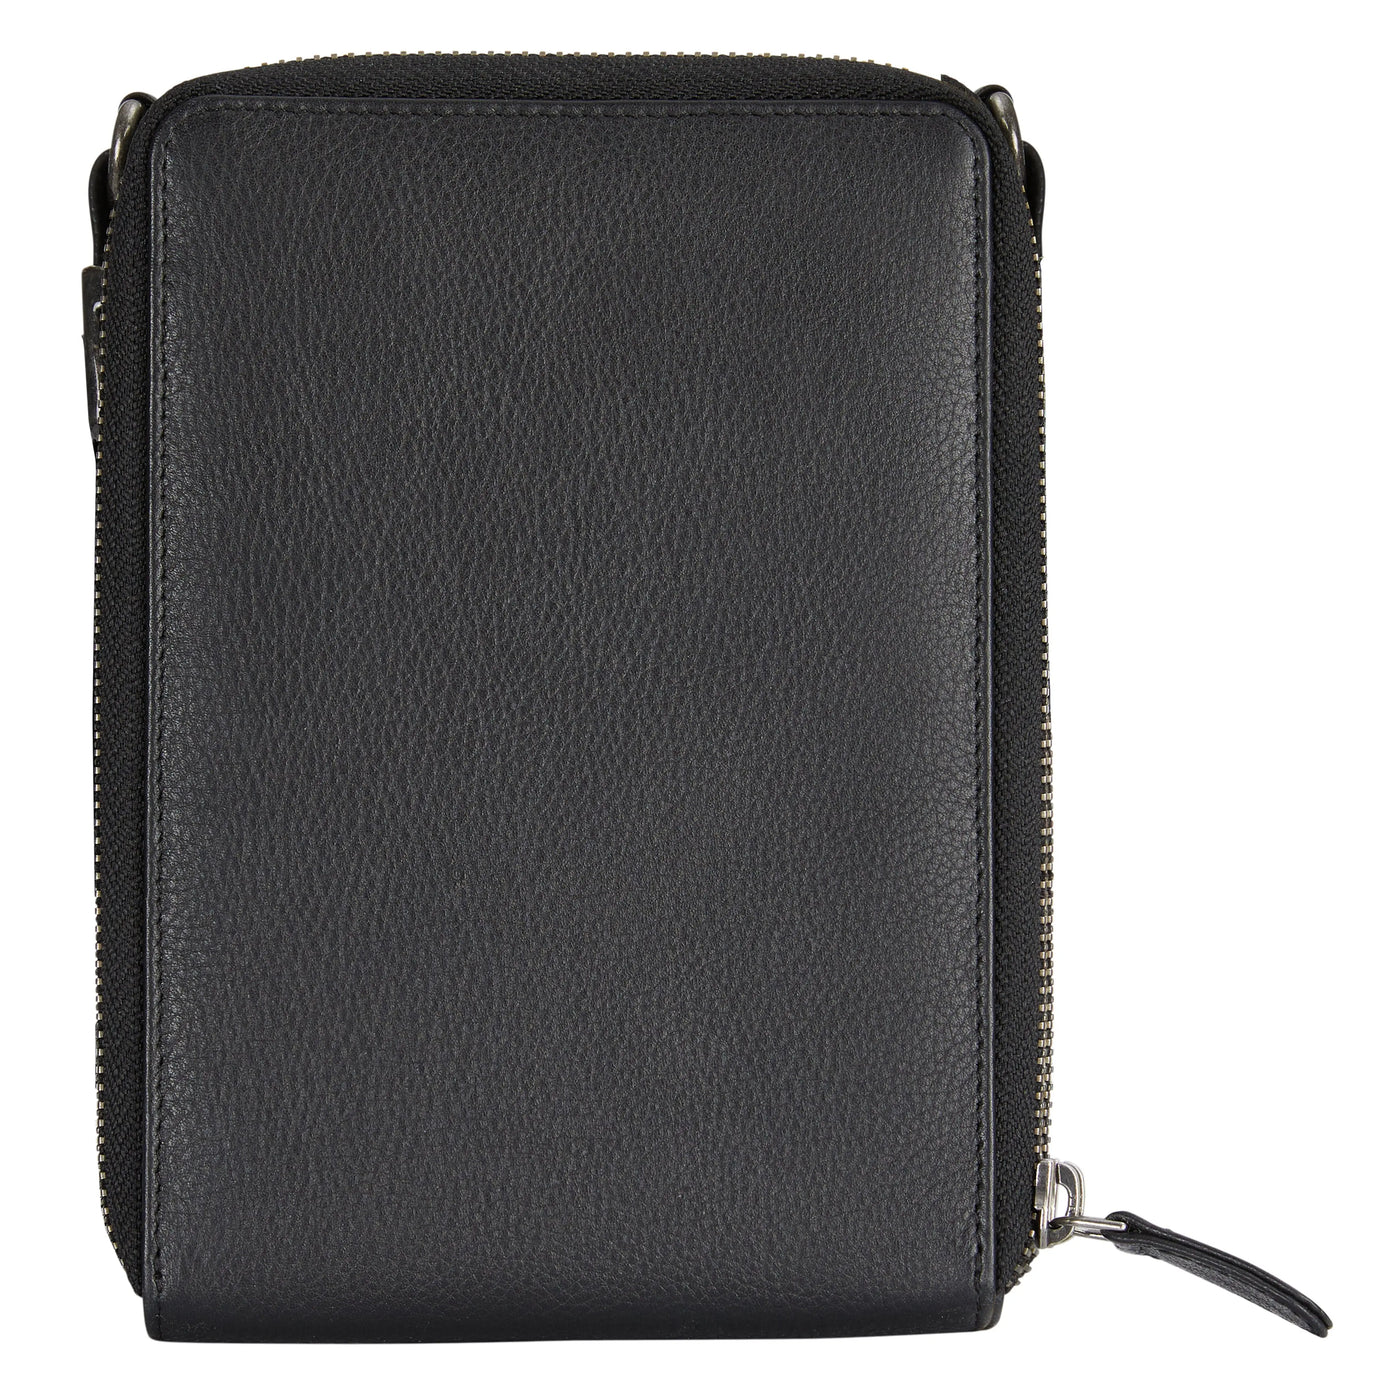 Geneva Smartphone Bag Plus with Flap and Zipper freeshipping - Sixth Edition